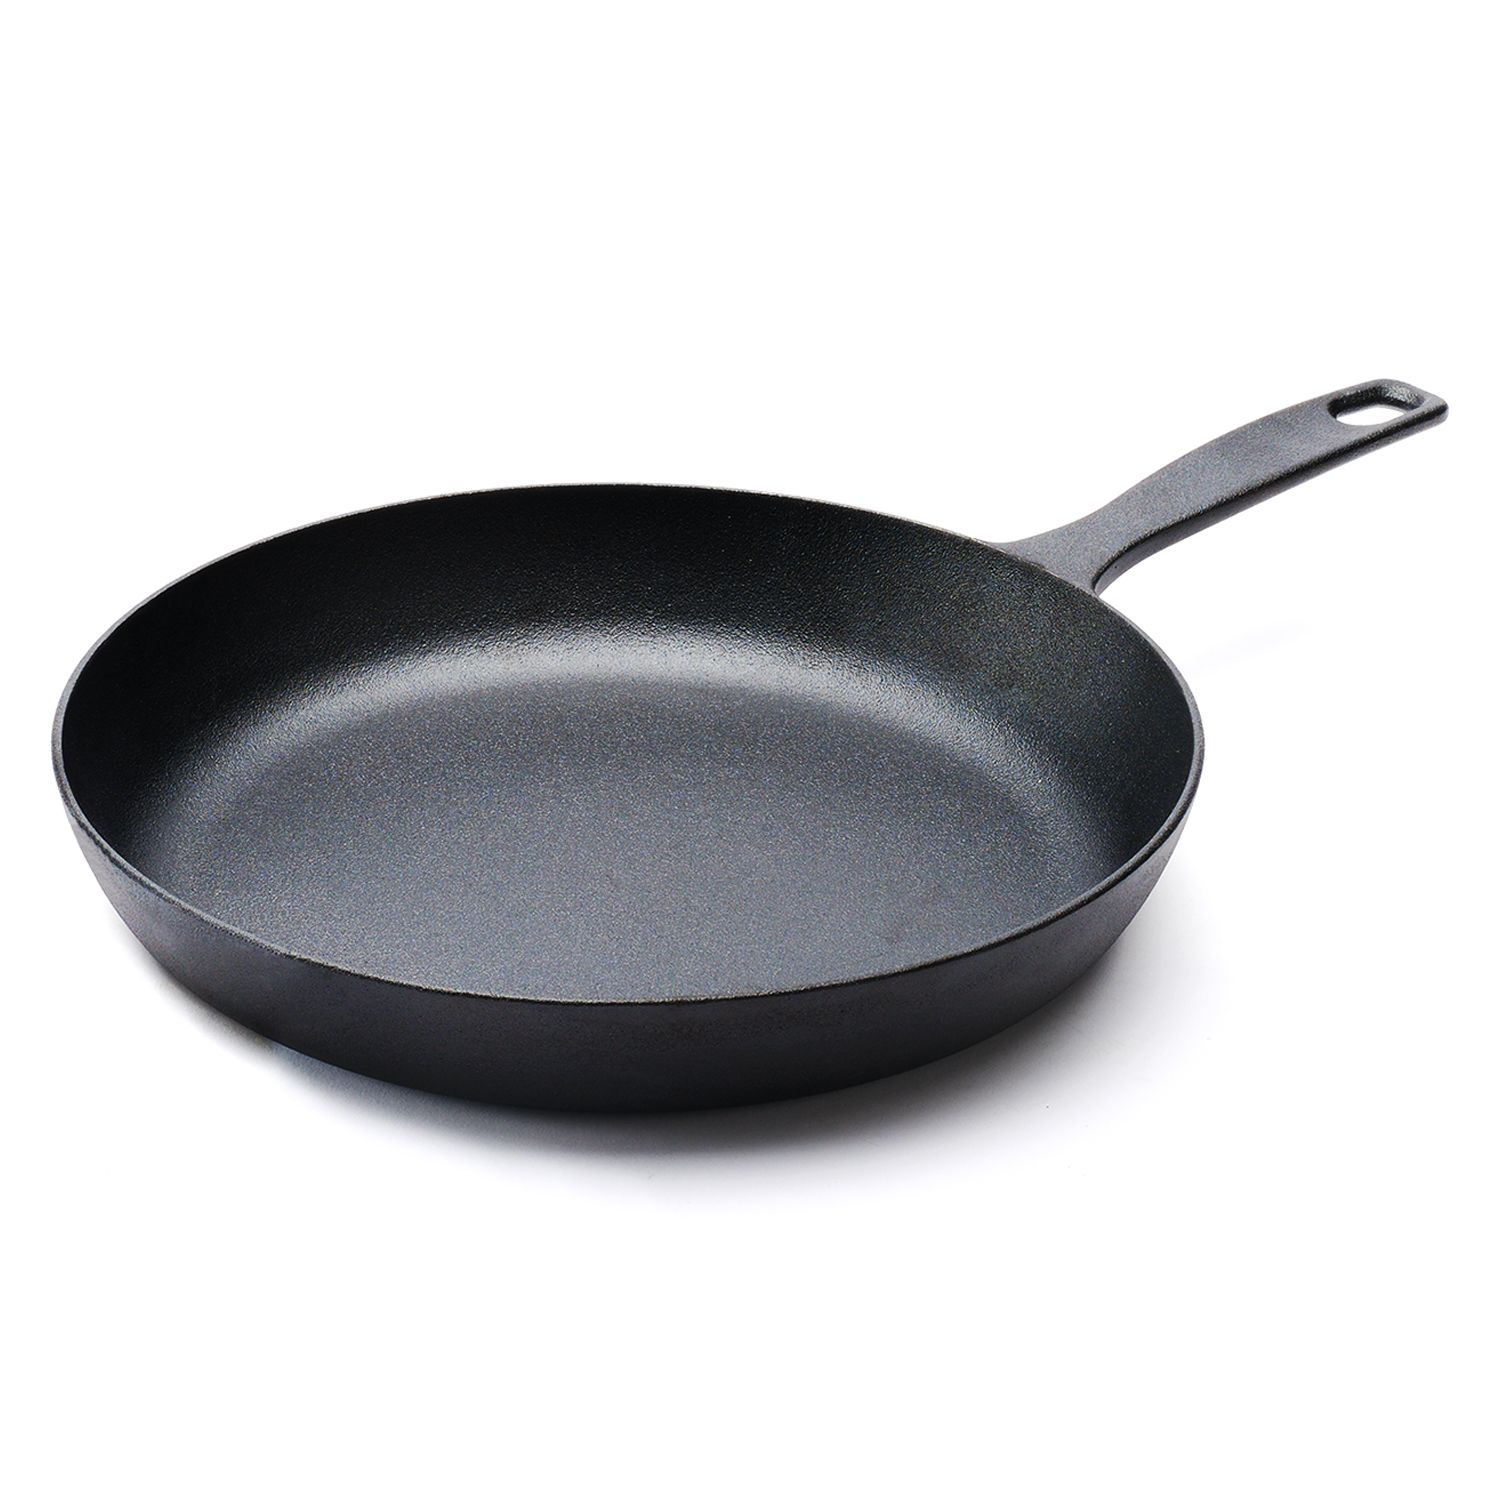 Food Network Pre-Seasoned Cast-Iron Skillet: 8" $6.40, 10" $10.61, or 12" $12.74 + Free Store Pickup at Kohl’s or Free Shipping Orders $25+